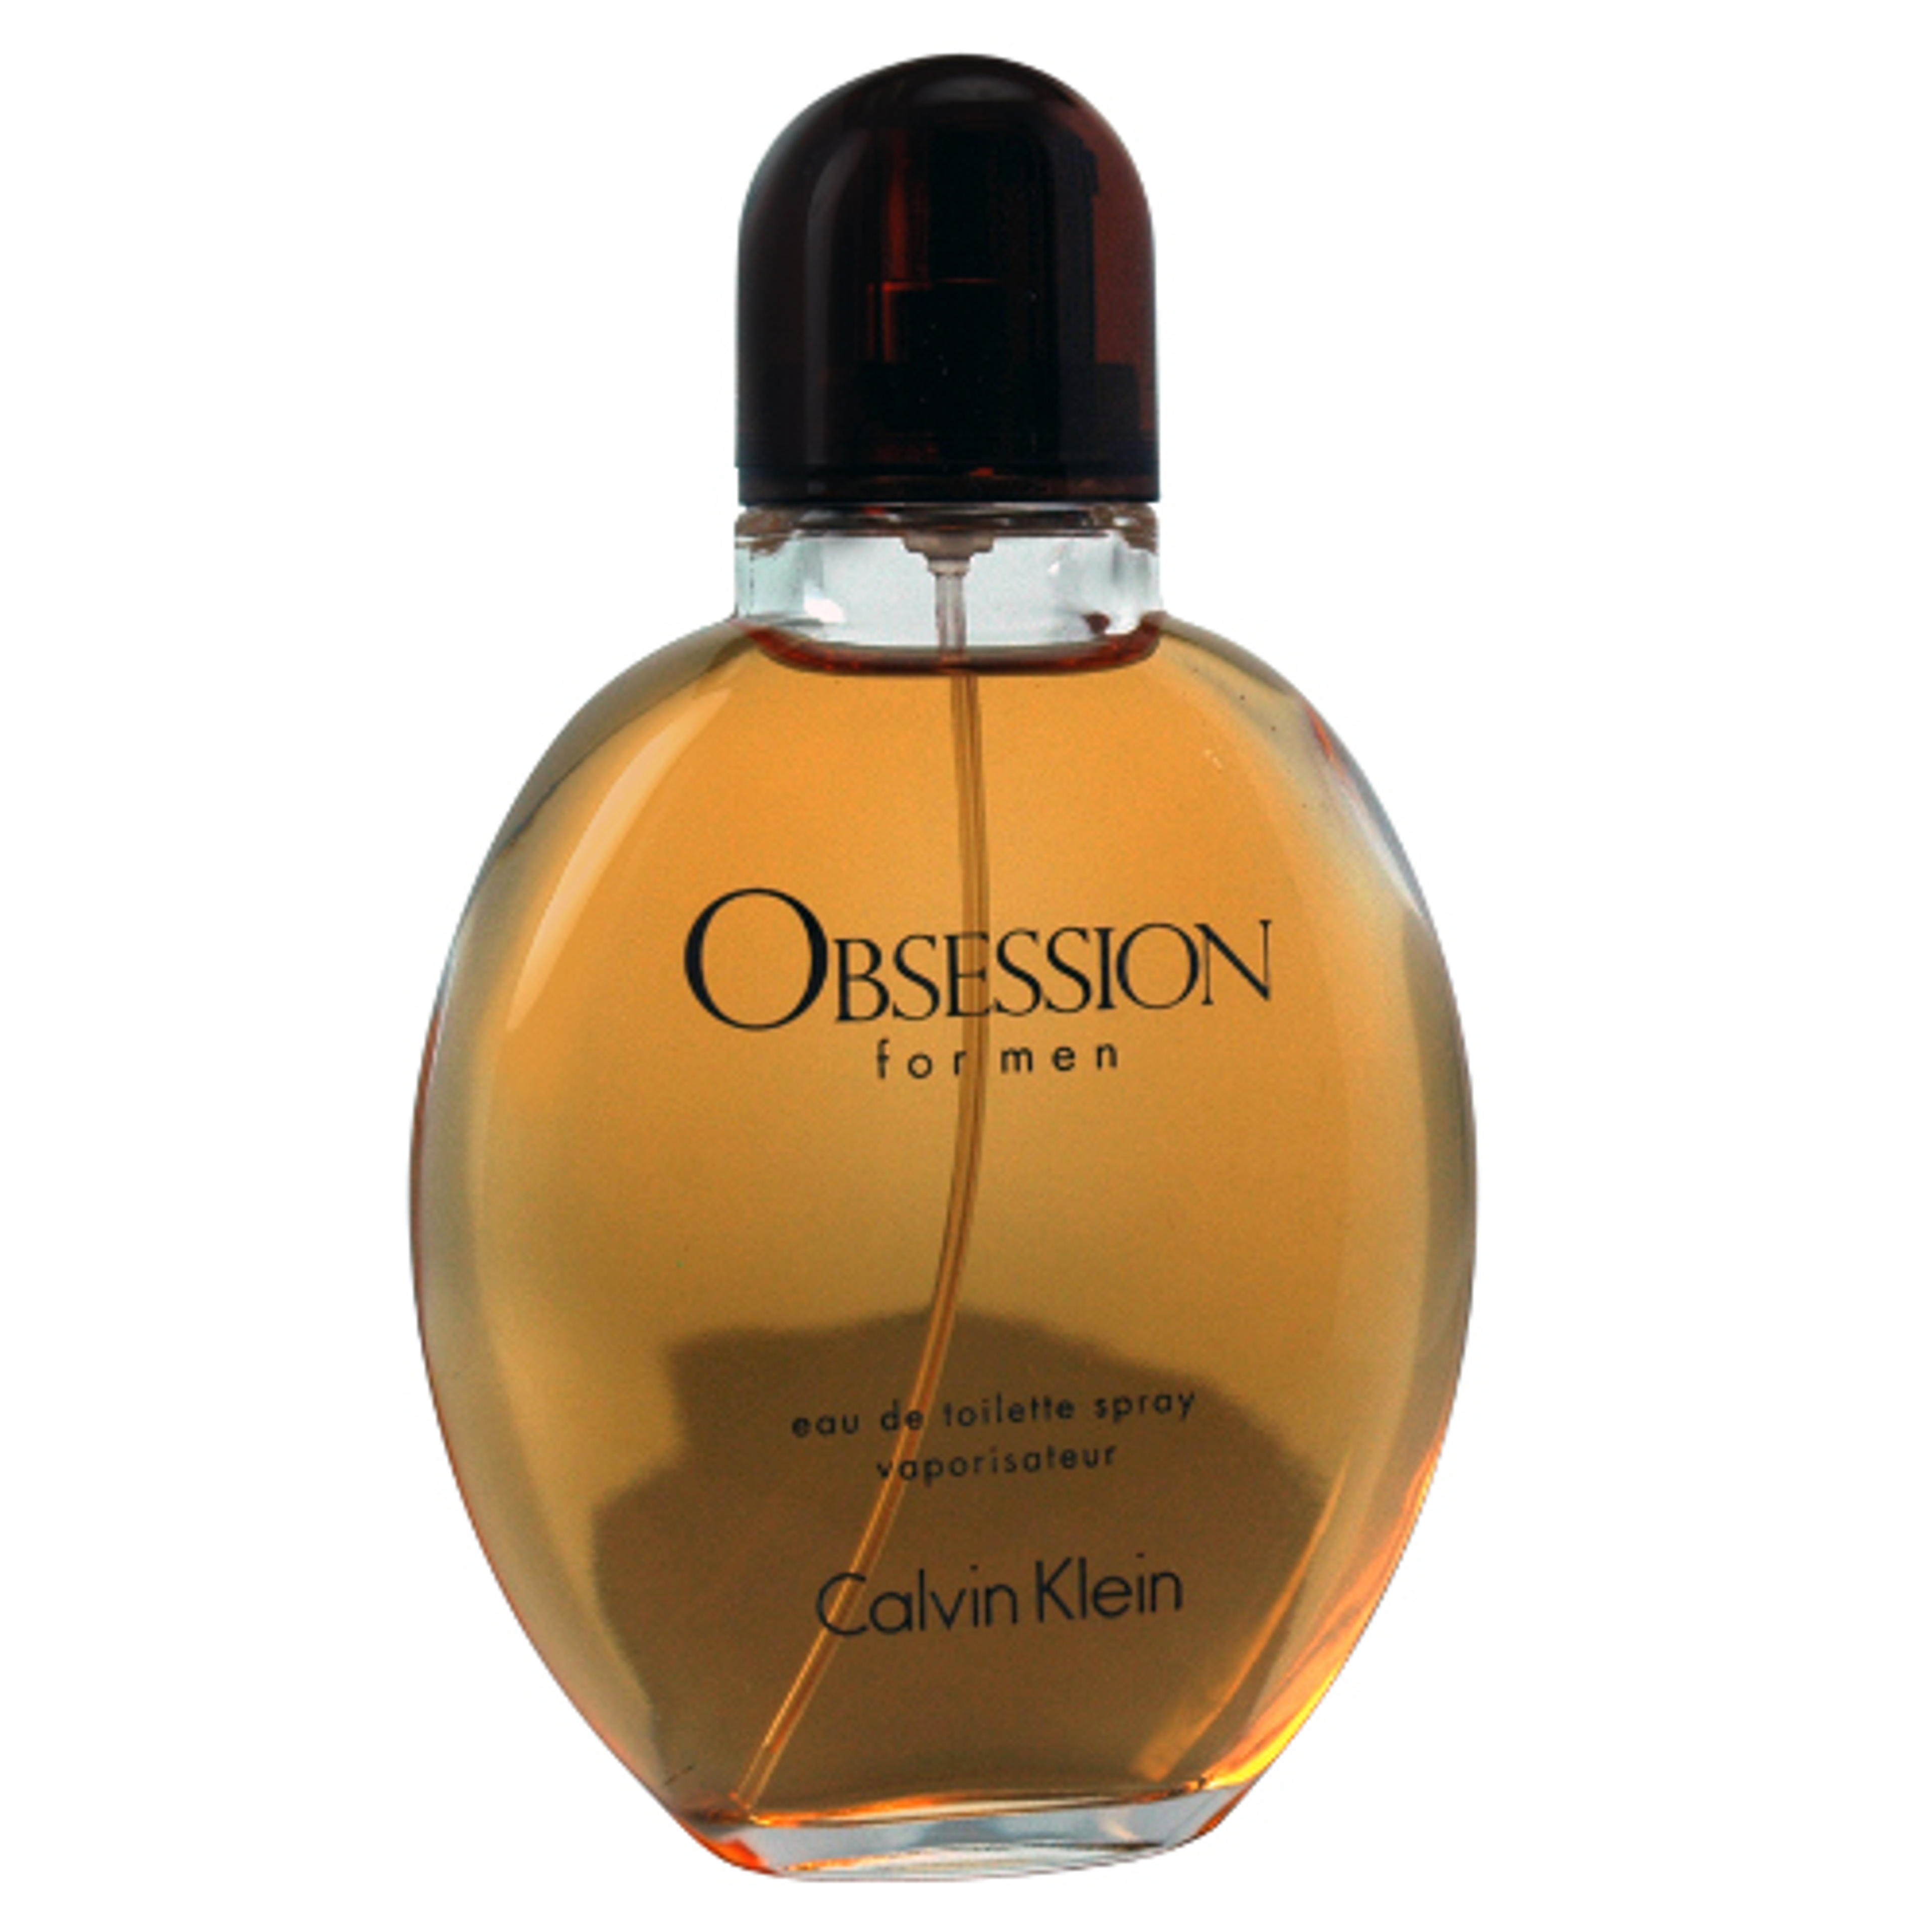 Obsession by Calvin Klein for Men EDT Spray 4 oz.-Unboxed-Palm Beach Perfumes